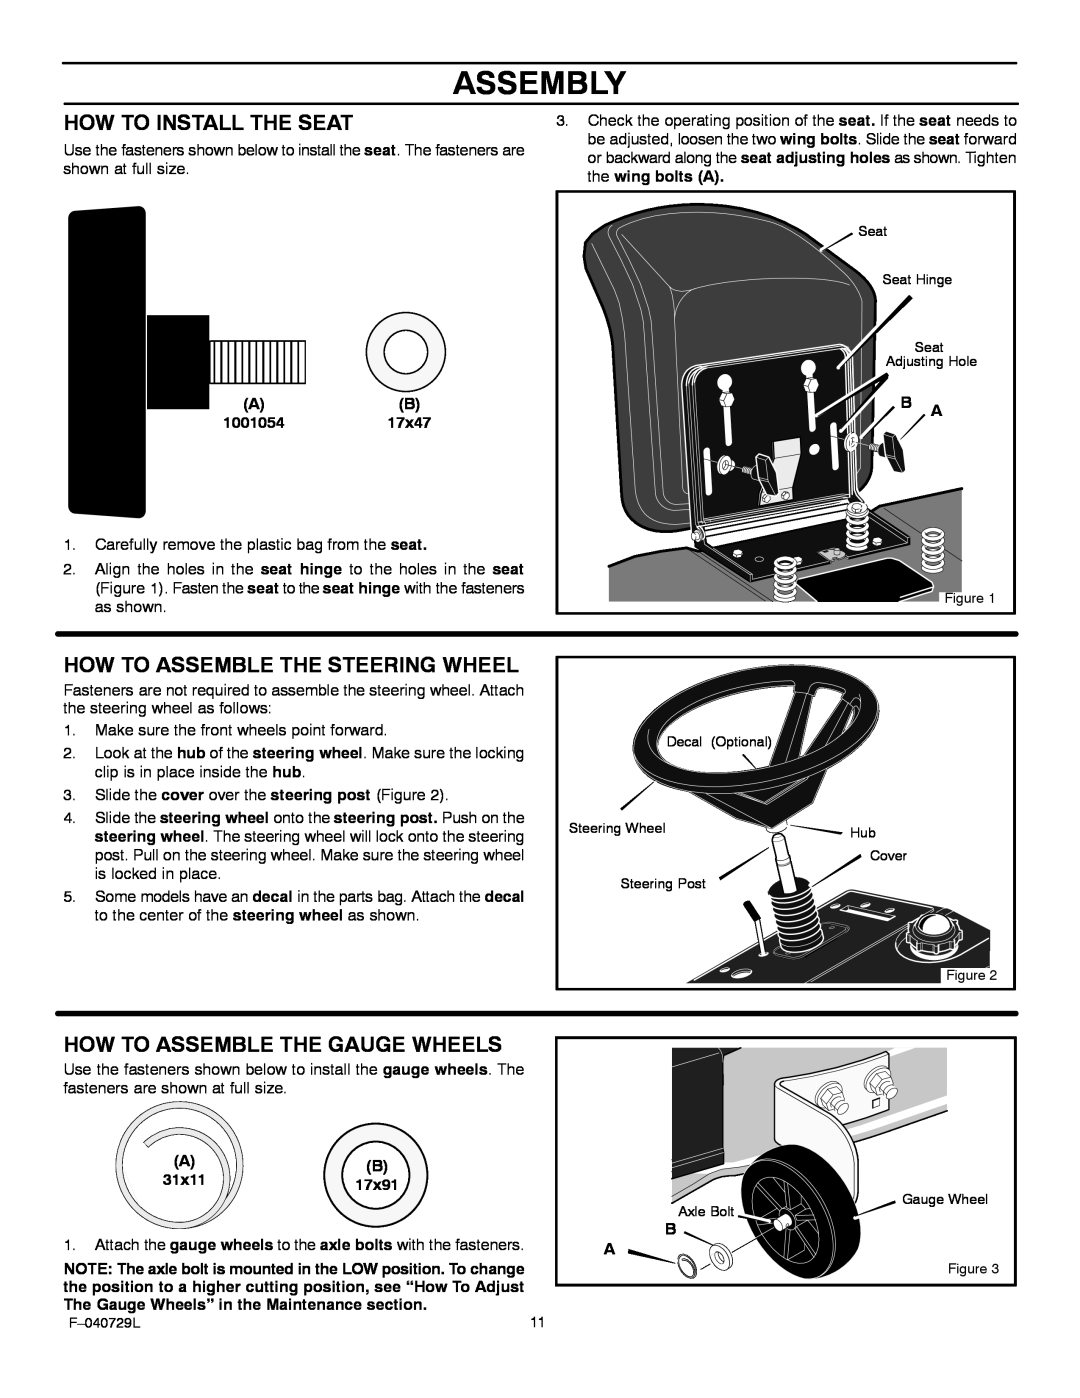 Murray 425620x92A Assembly, How To Install The Seat, How To Assemble The Steering Wheel, How To Assemble The Gauge Wheels 